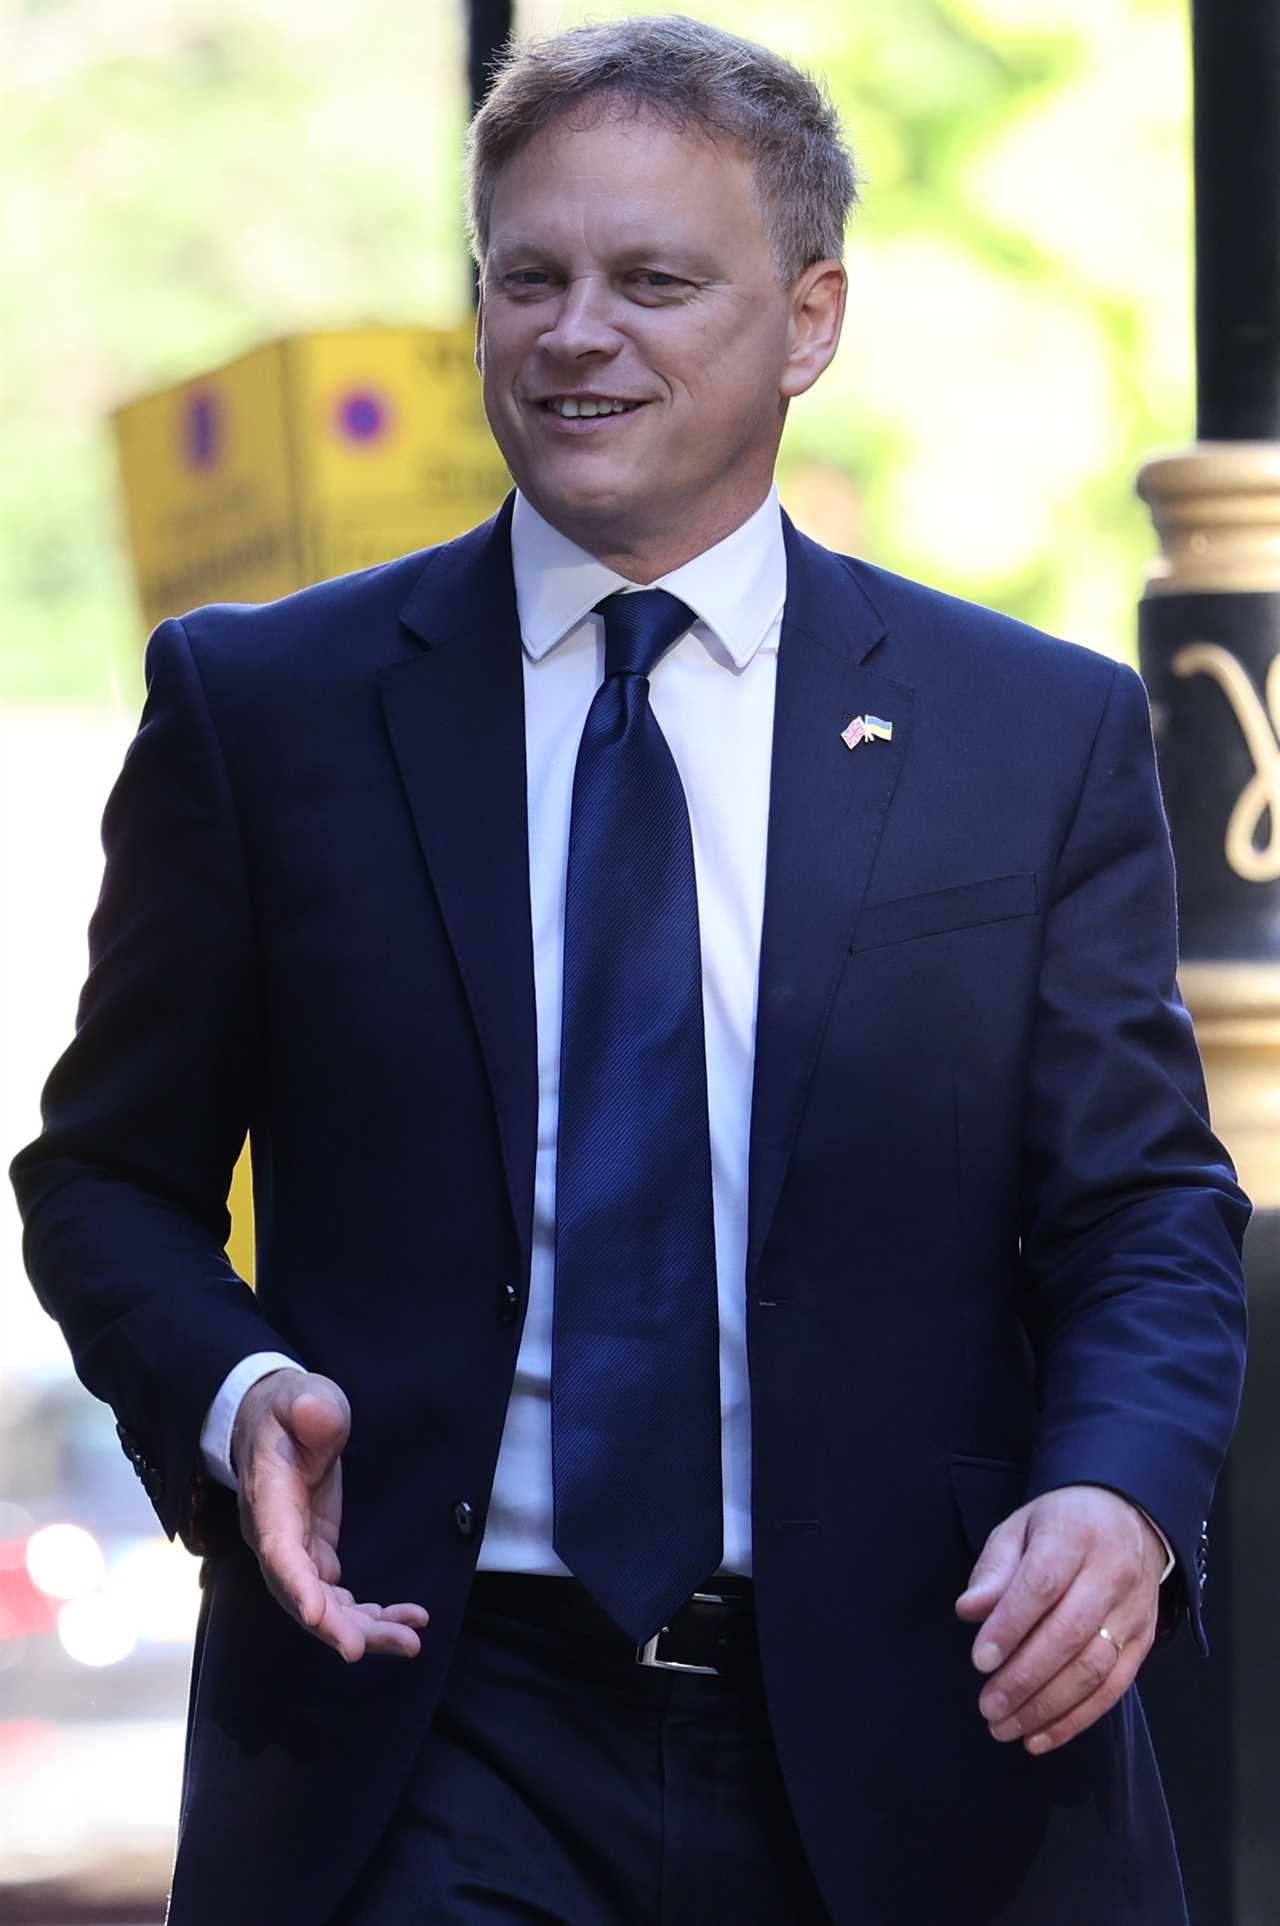 Grant Shapps claims HE is the reason Boris Johnson resigned – hours after he ‘gave him the facts’